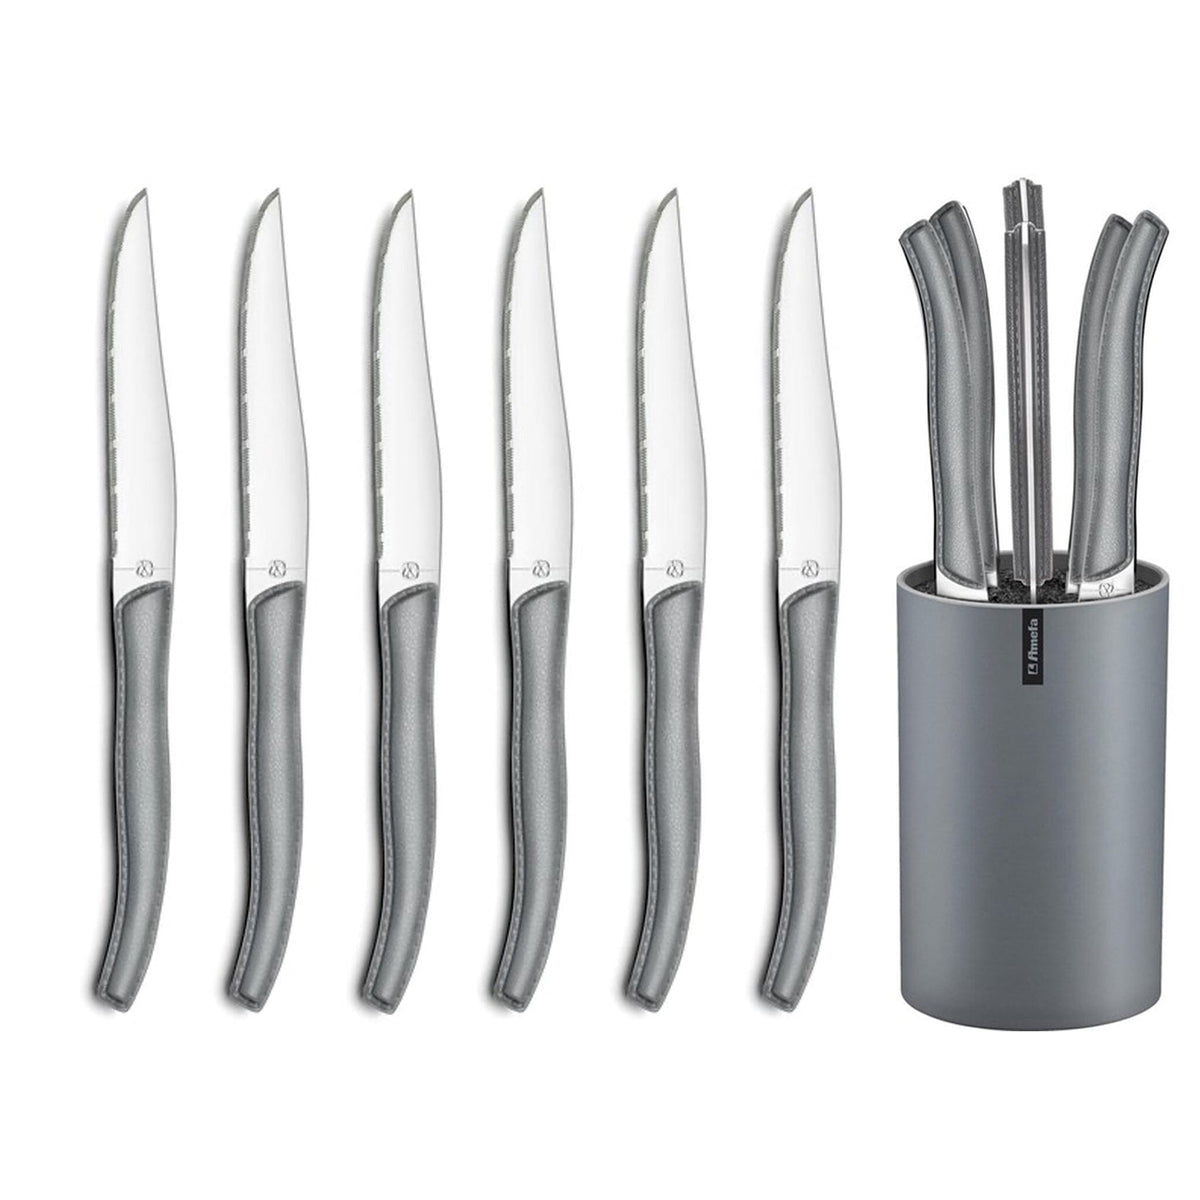 øst Synlig bånd Lou Laguiole - 6-pc steak knives in gray block - gray - Cooking Giant